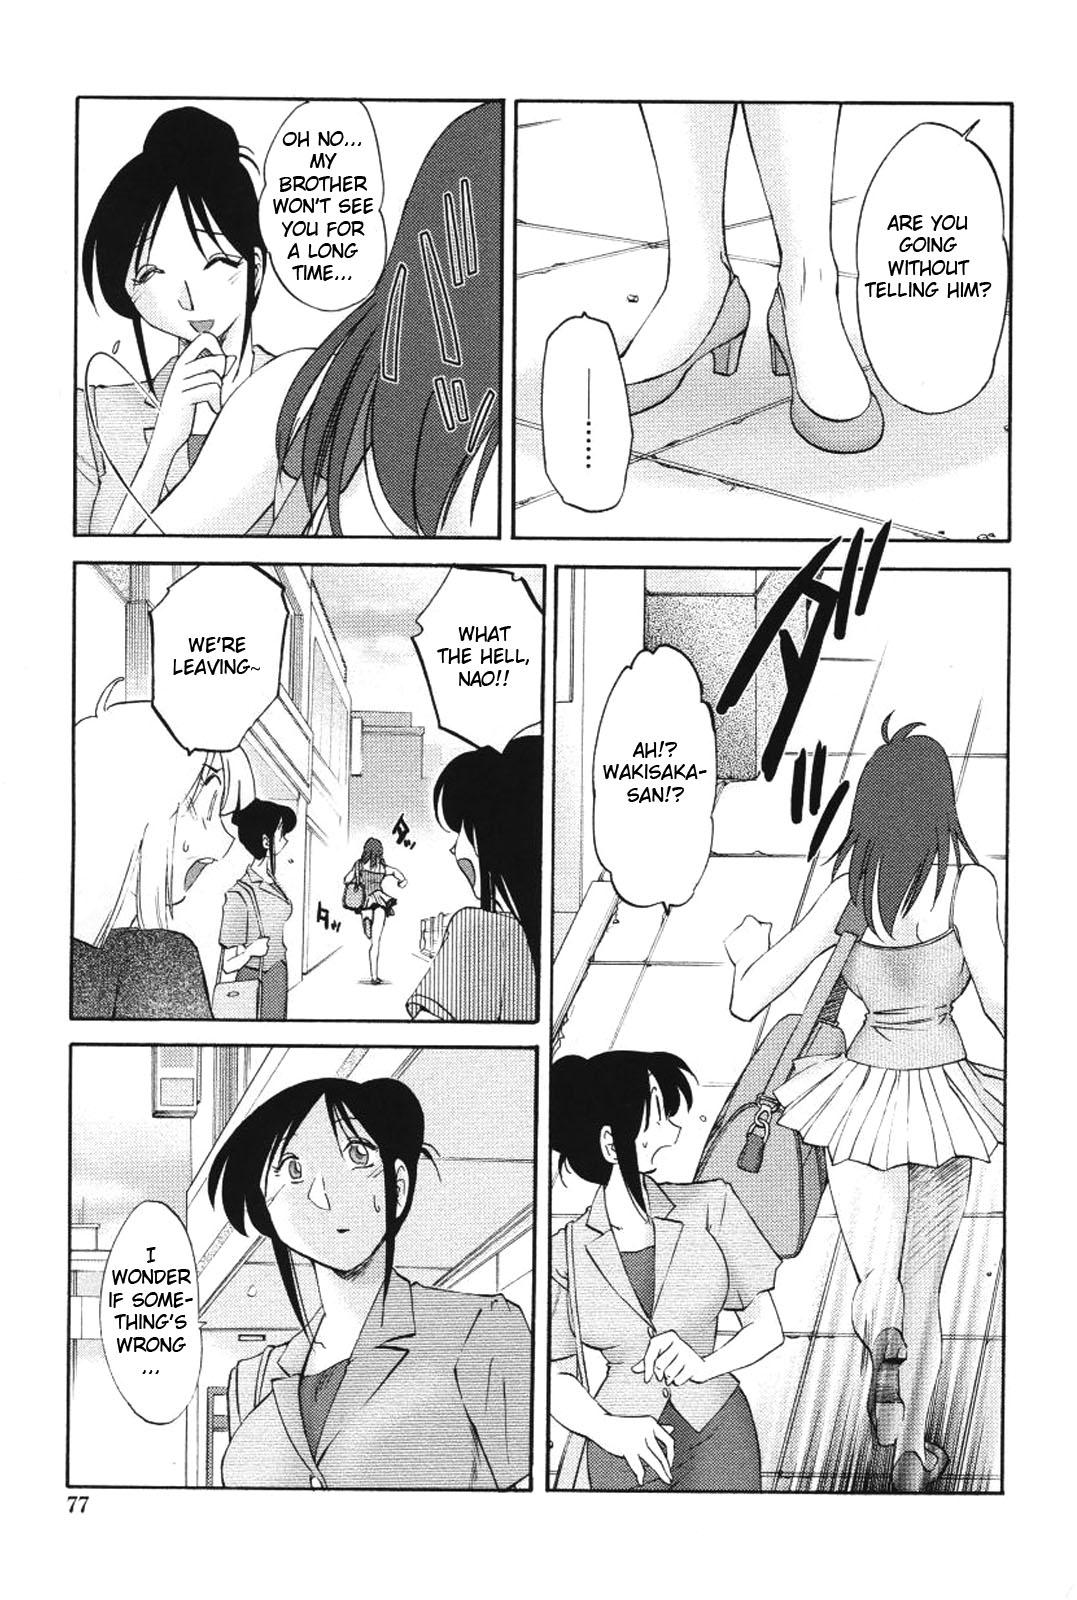 Cdmx My Sister is My Wife Chapter 12 (English) Translated by Fated Cricle Hd Porn - Page 7